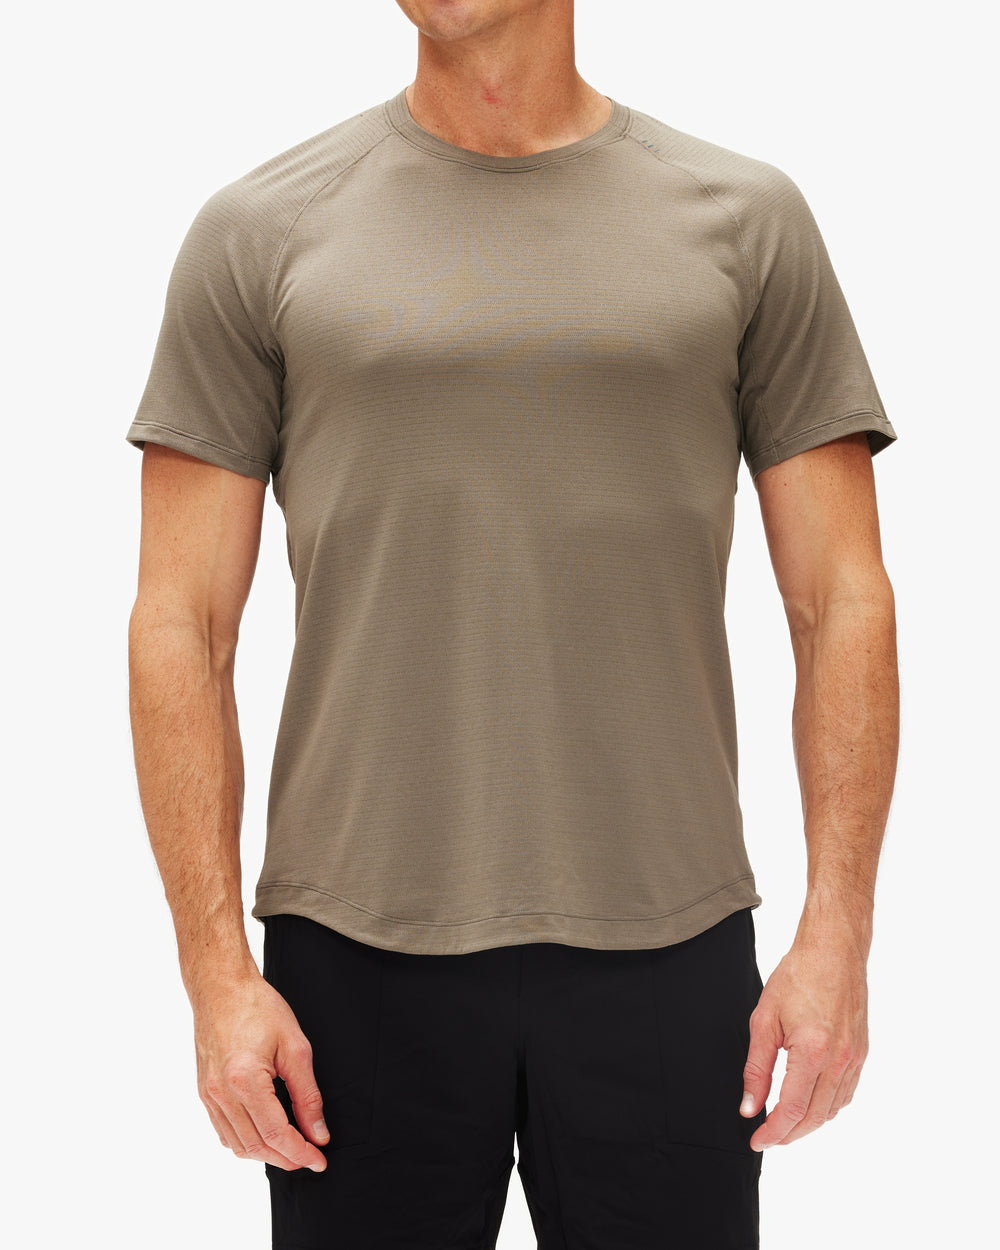 Lululemon License to Train Short Sleeve – The Shop at Equinox